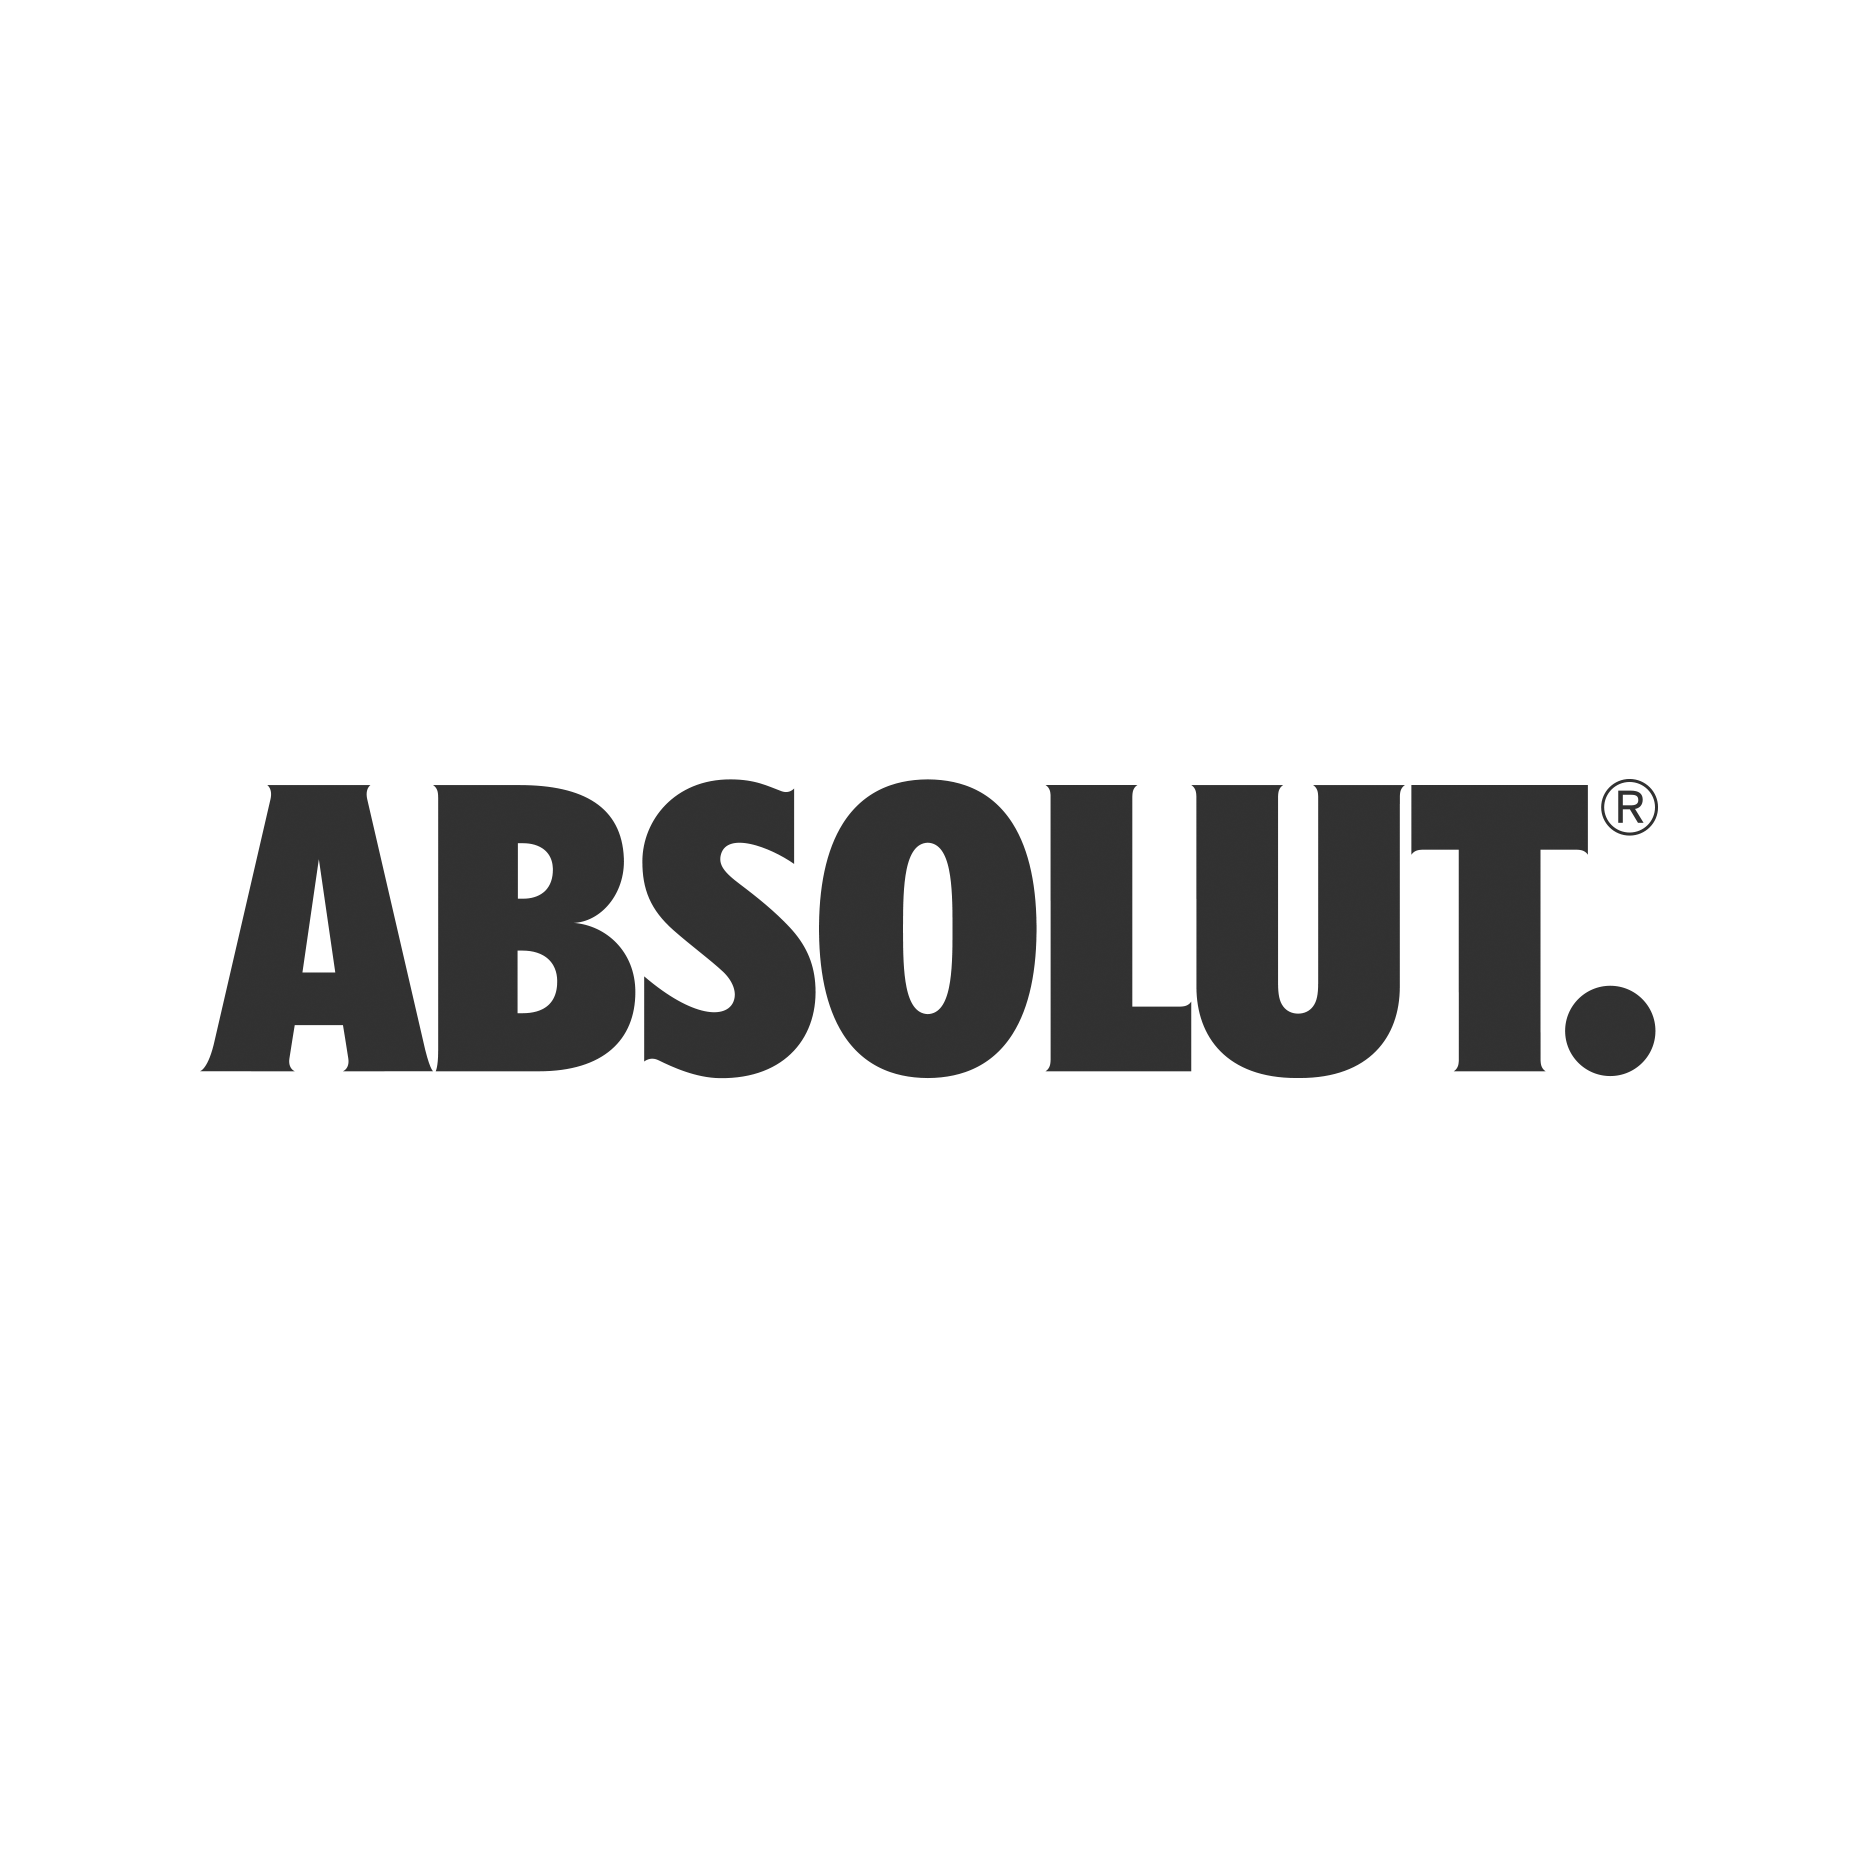 Absolut Logo - Grayscale